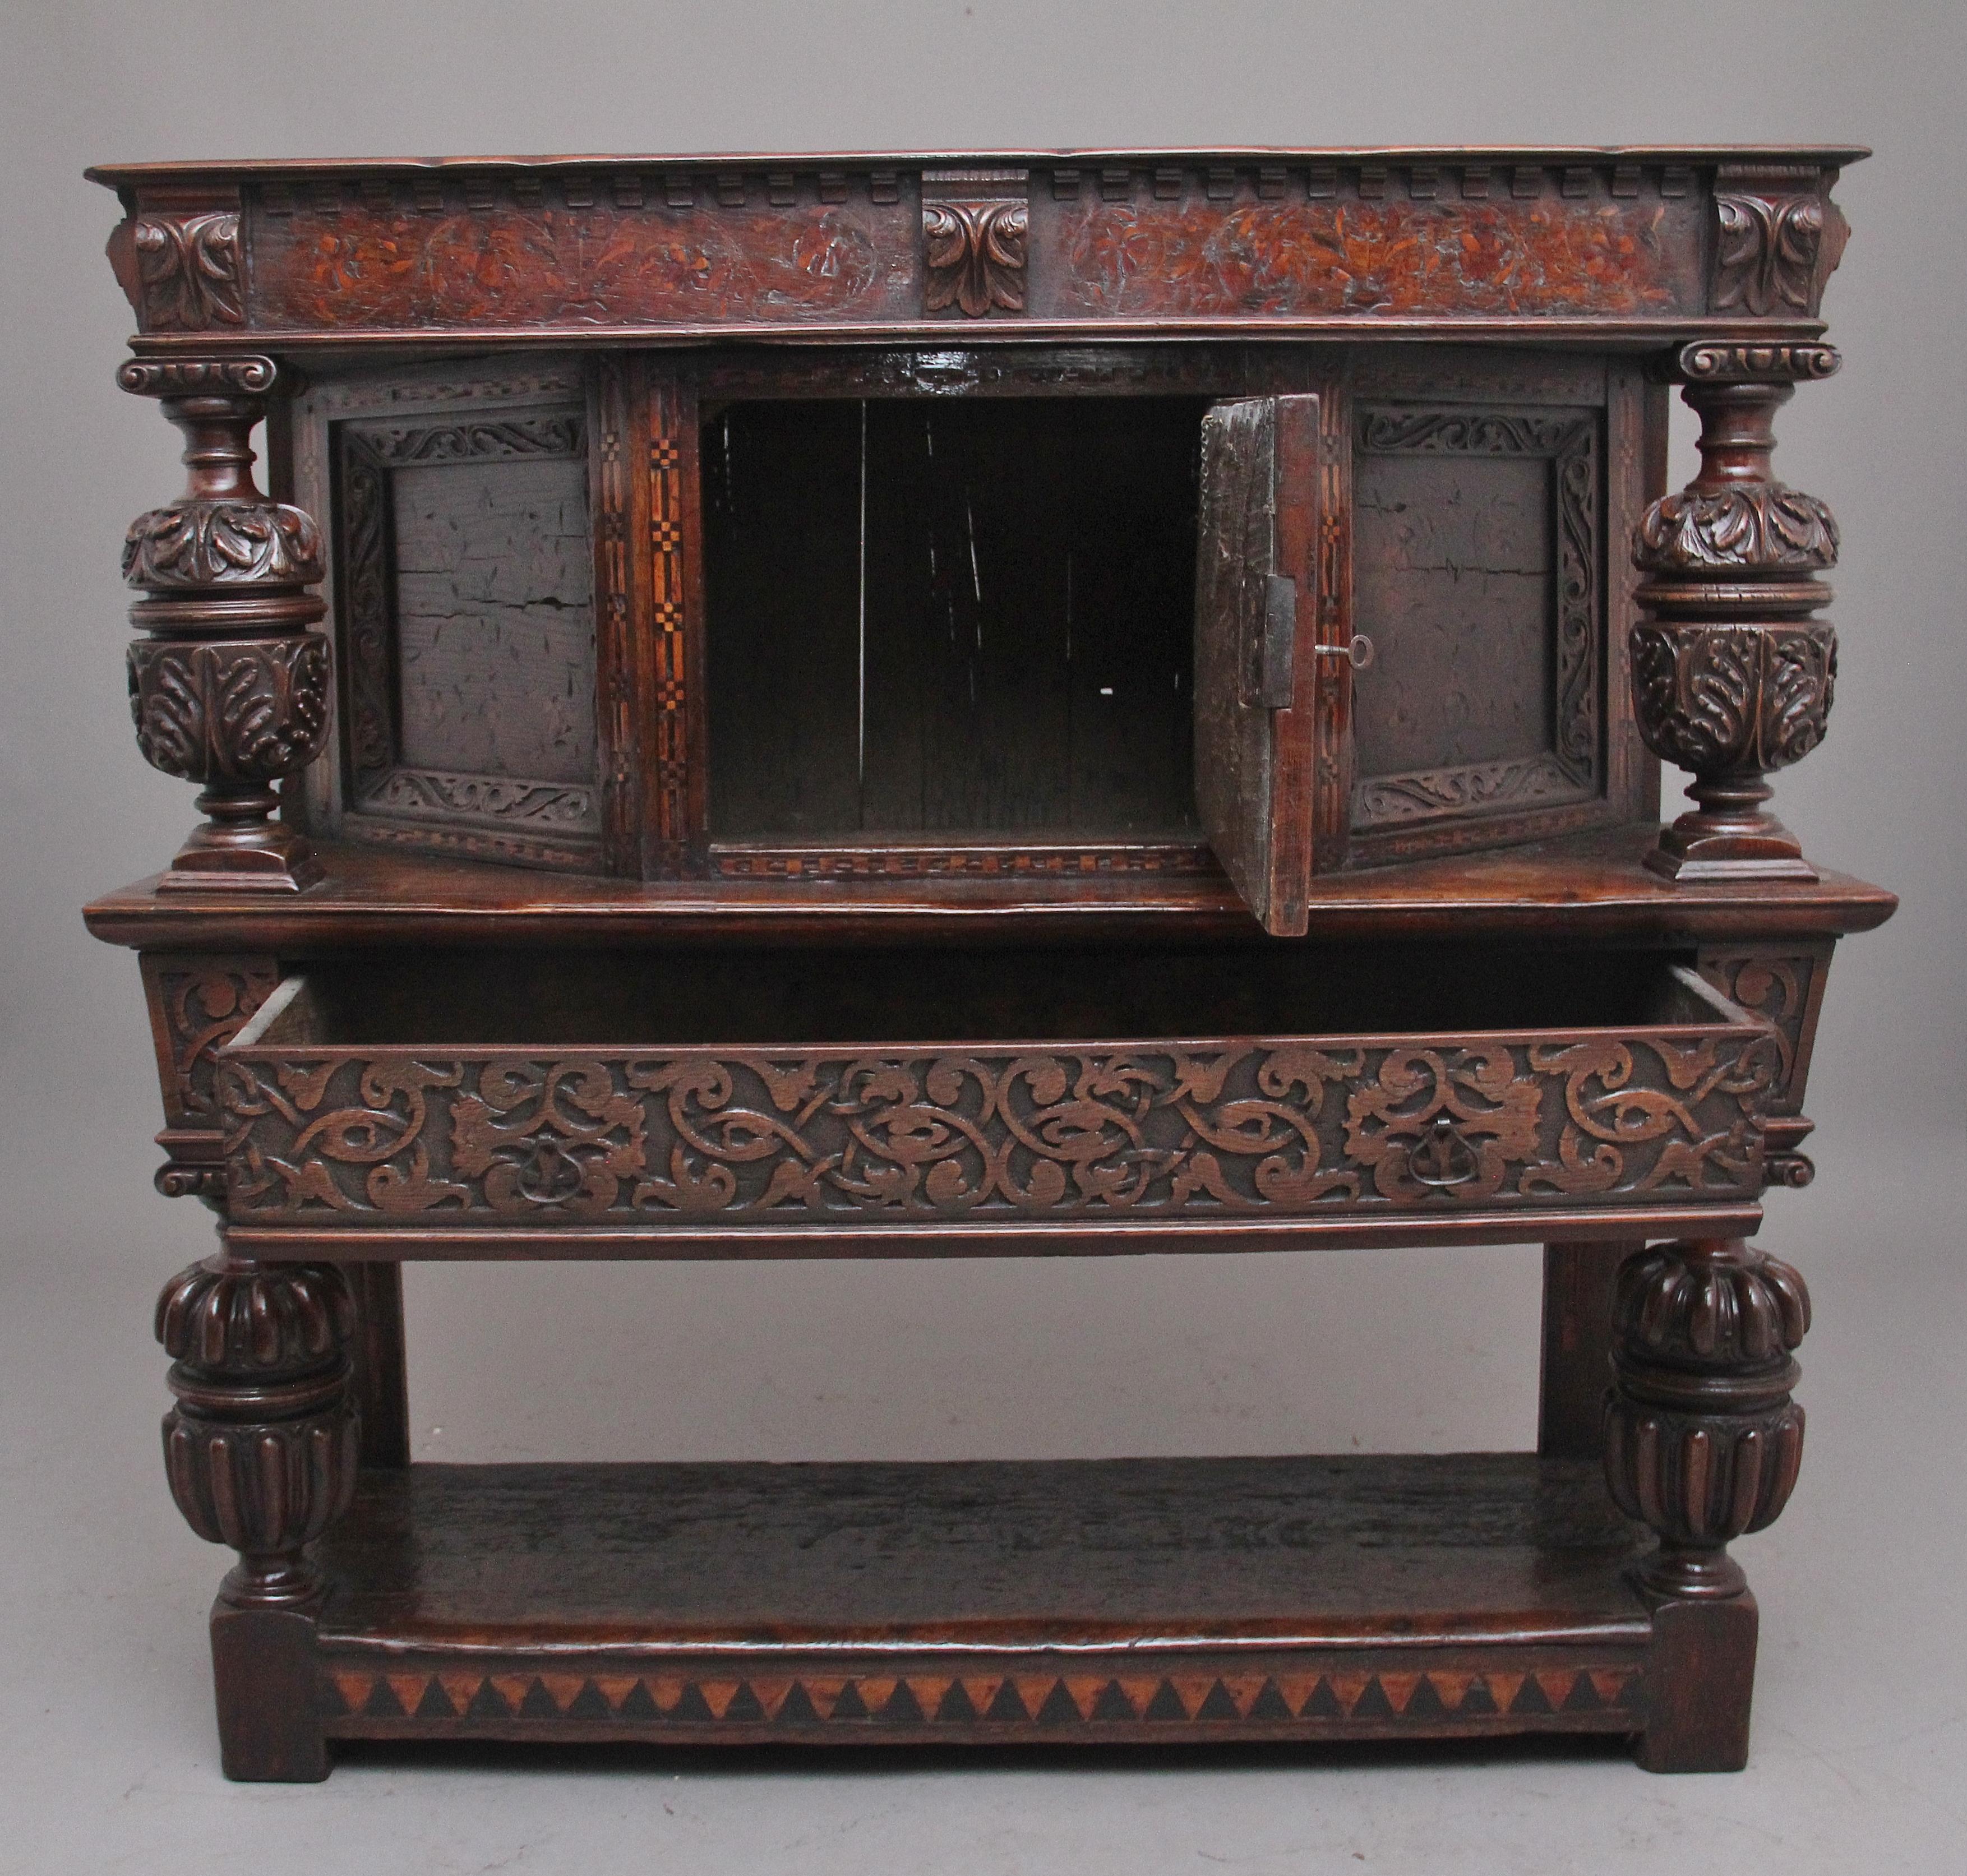 A very rare late 16th century oak court cupboard dating from the Tudor period, having a wonderfully rich oak patina, beautifully carved supports and rails, with holly and bog oak inlay, the top section having a central cupboard with angled panels